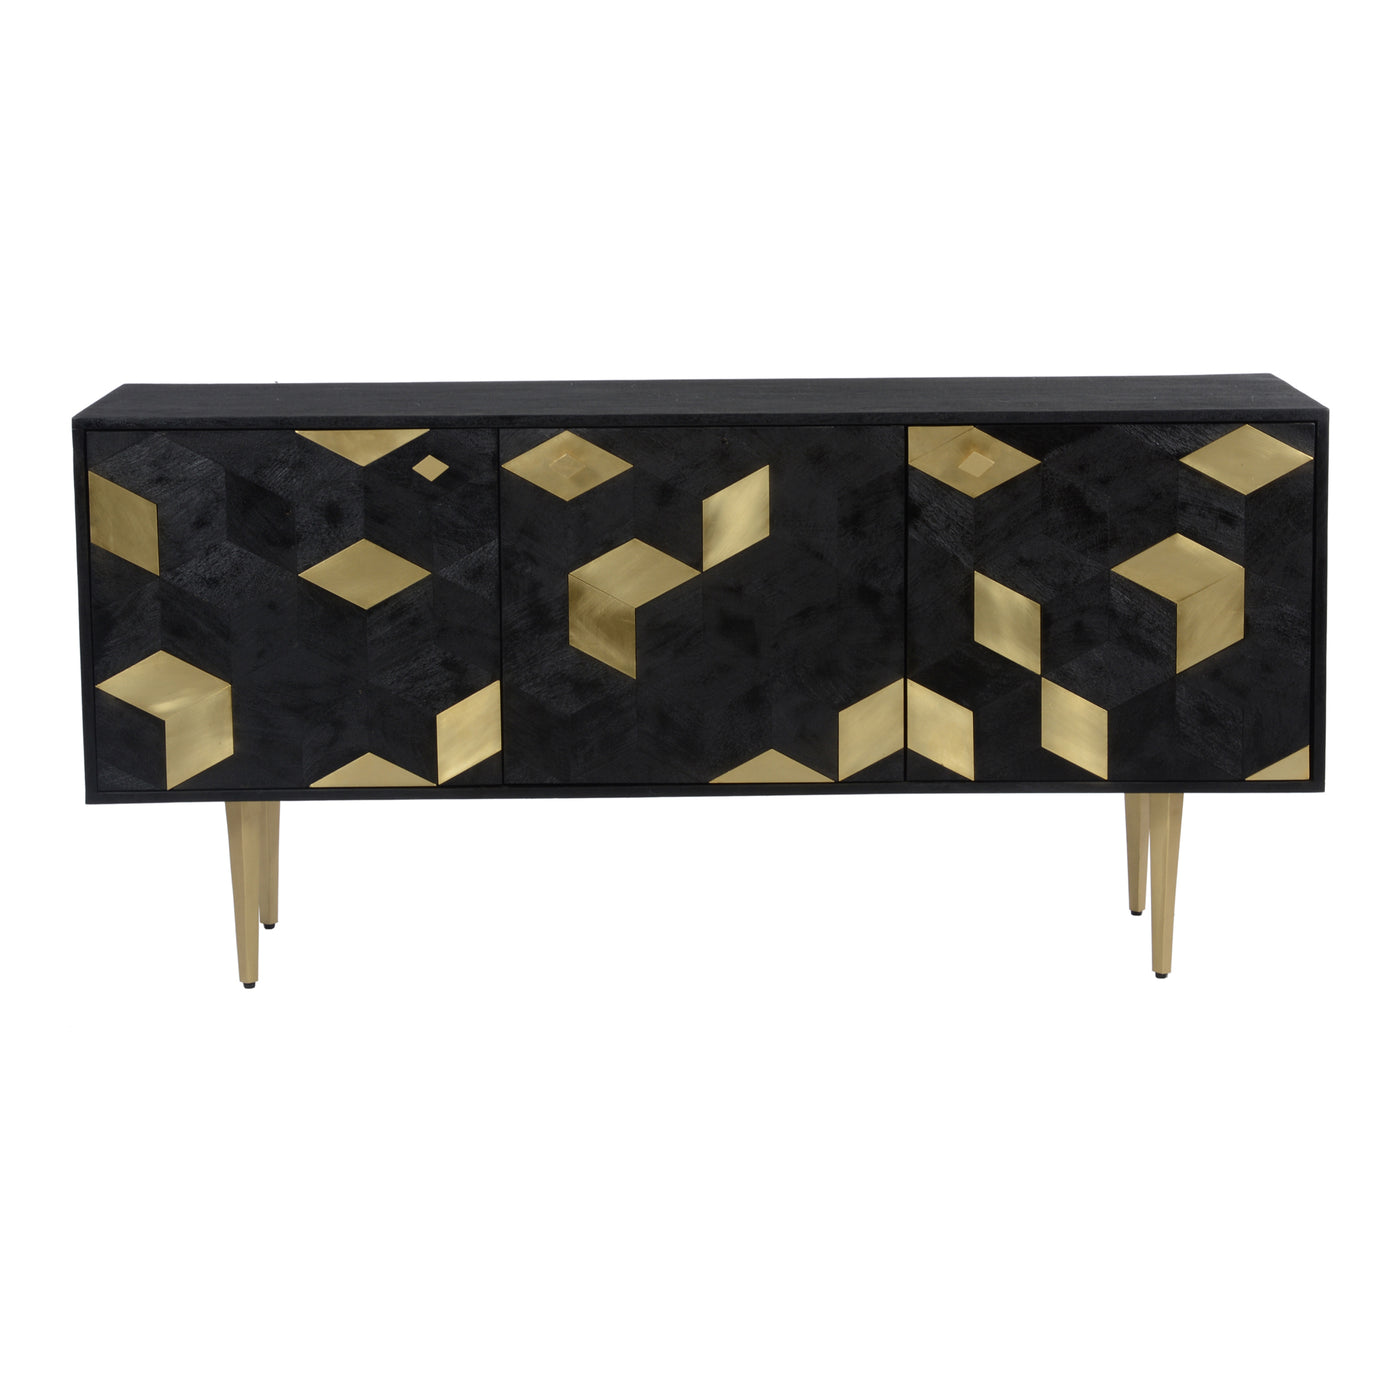 A sweet escape for all of your things. The Sapporo Sideboard features darkened natural mango wood juxtaposed with geometri...